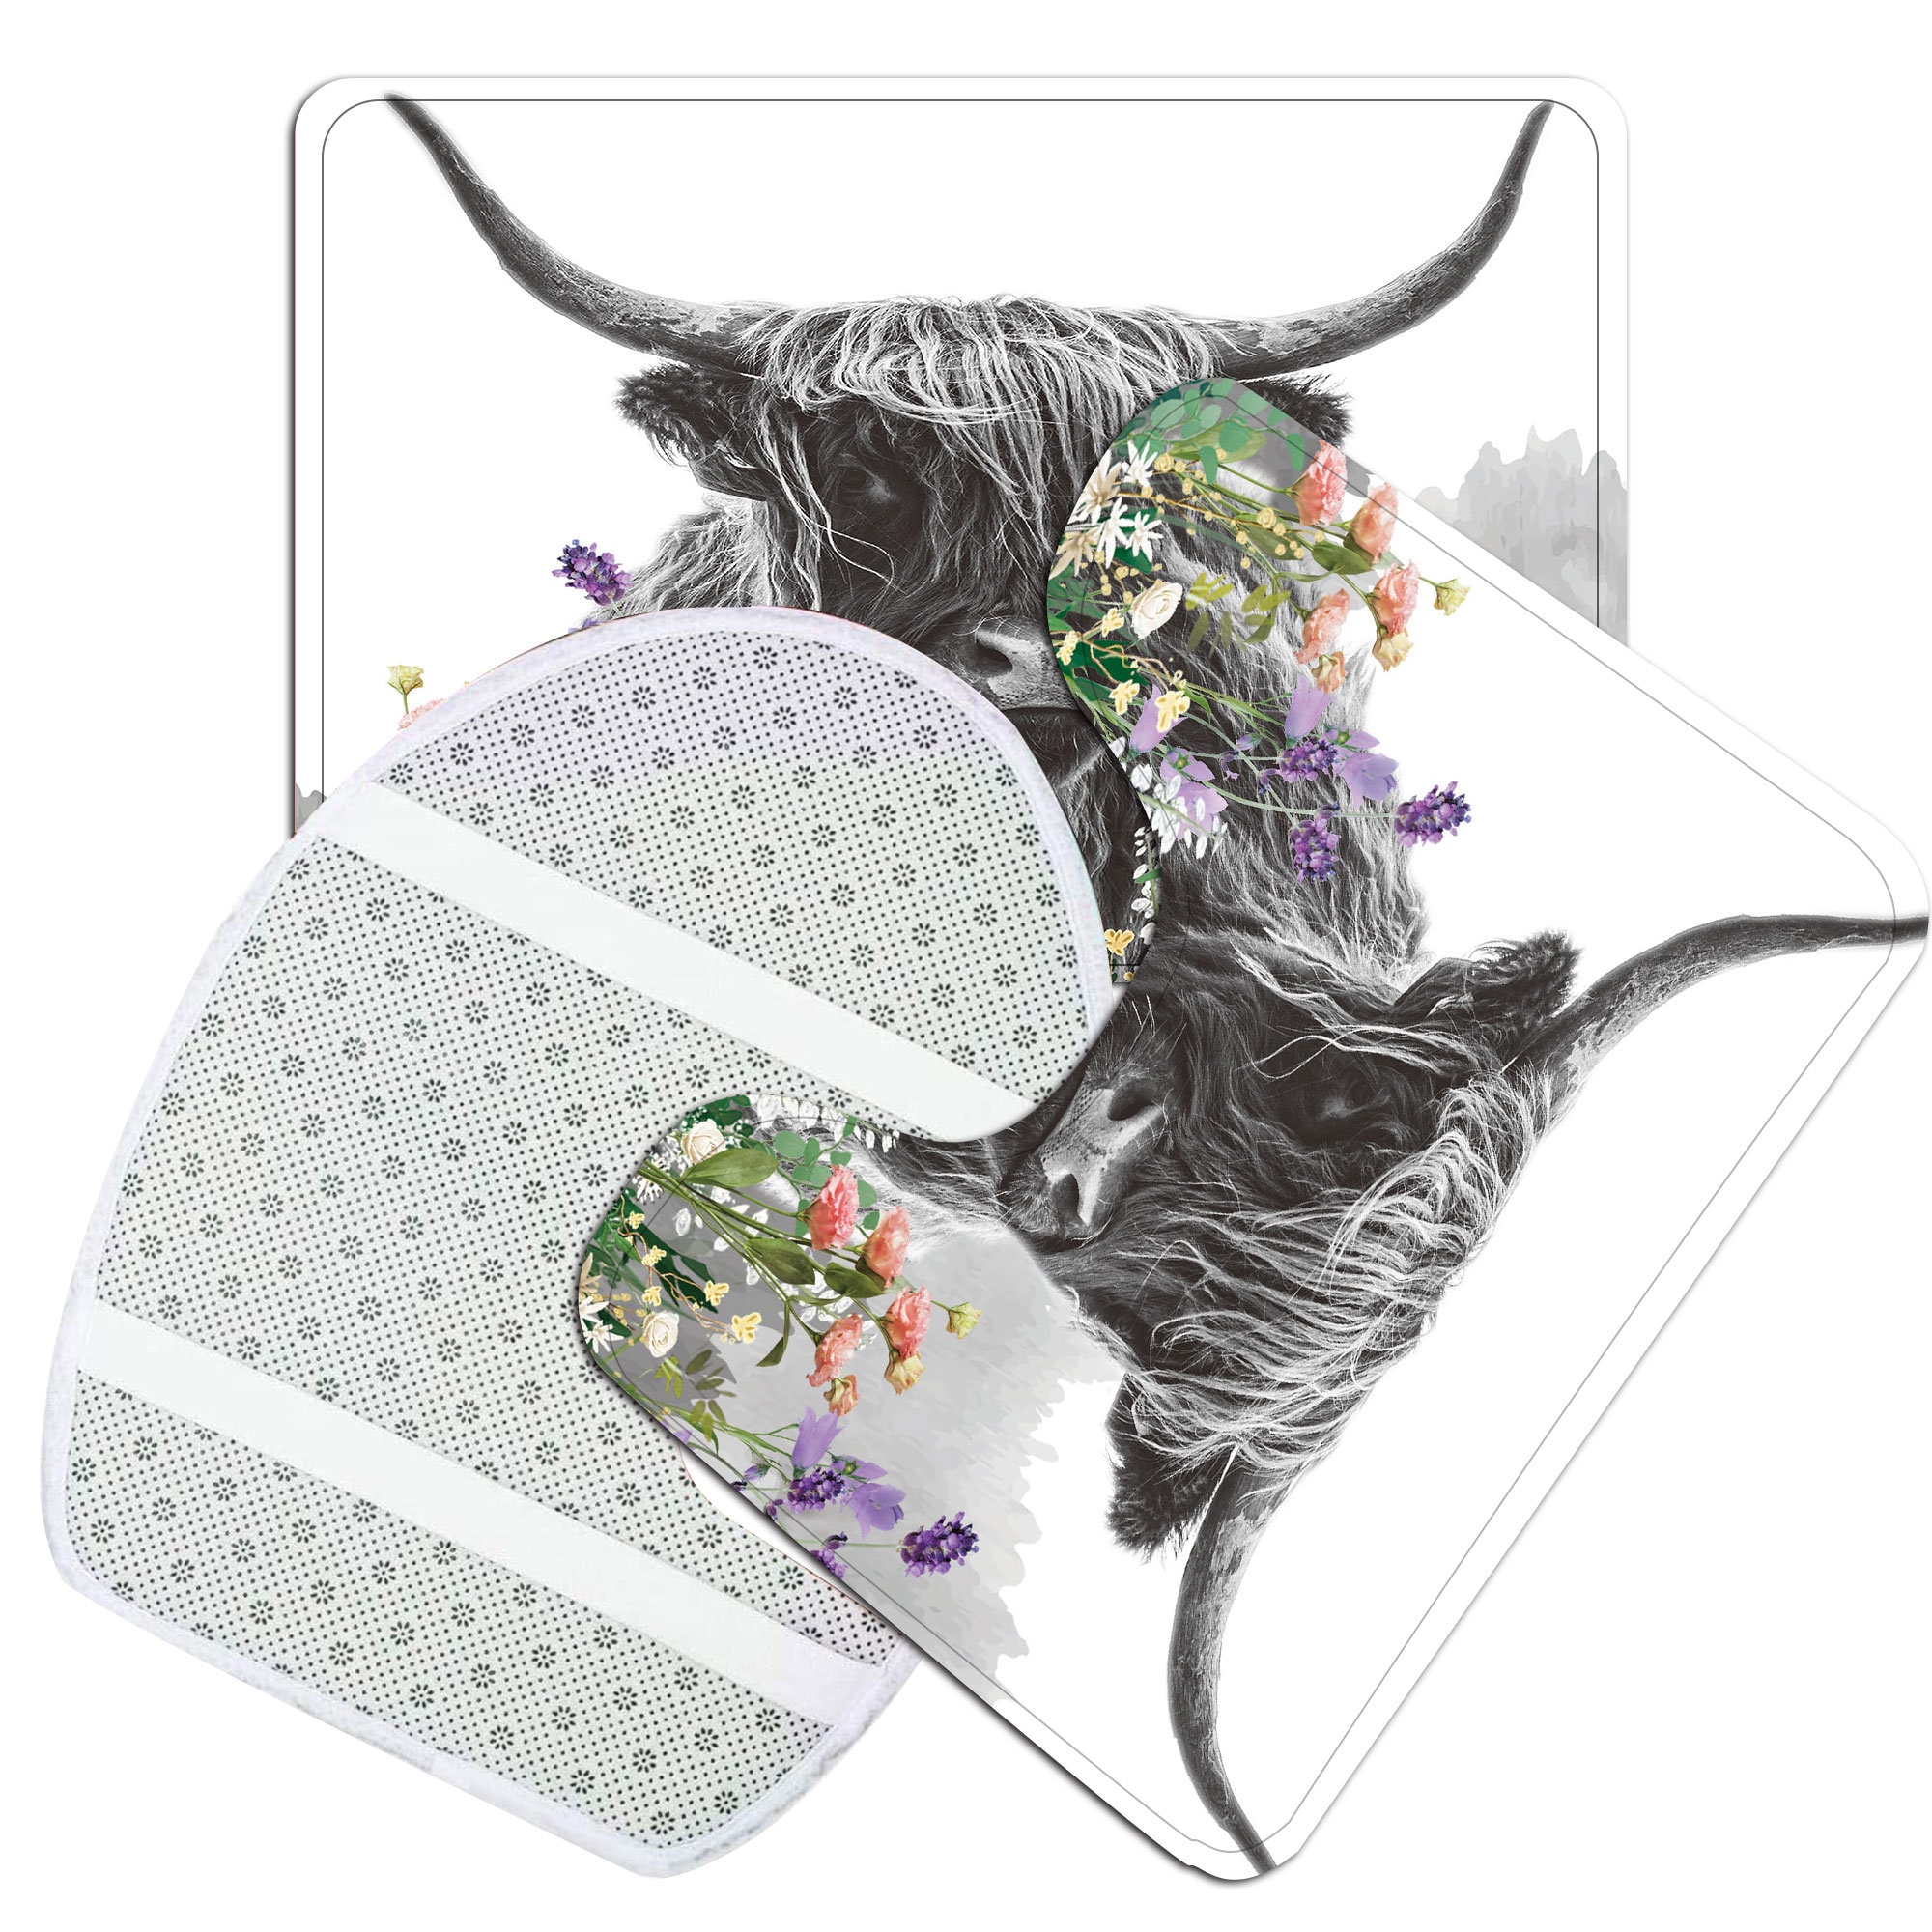 Highland Cow Bath Rug, Funny Farmhouse Animal Cattle Rustic Floral Toilet Seat Cover